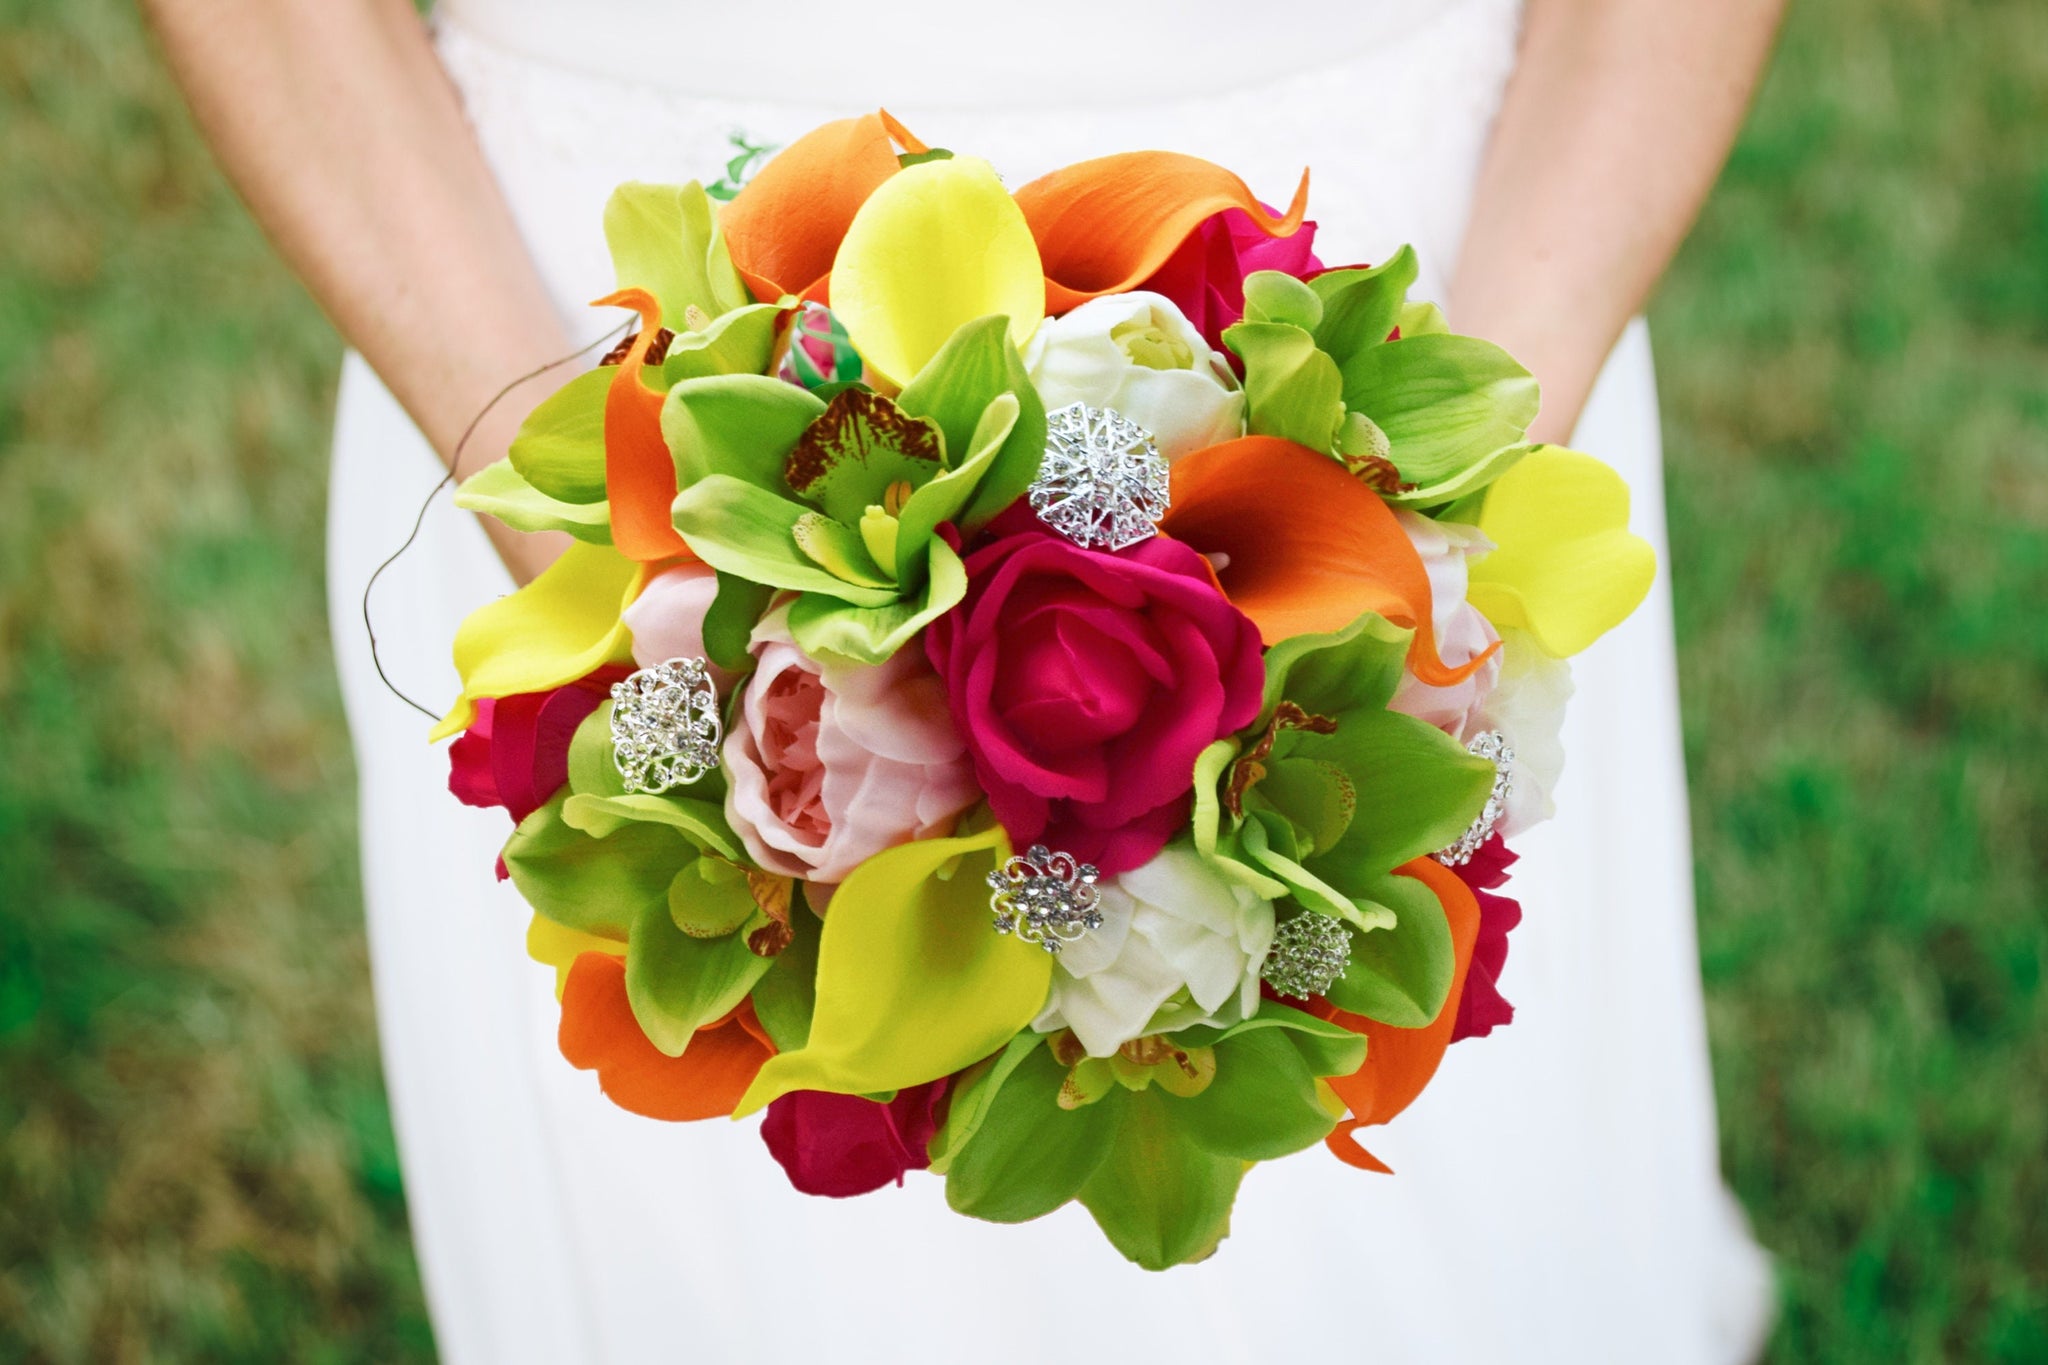 Tropical Wedding Bouquet - Orchids Calla Lilies Roses Peonies Bridal Bouquet or Bridesmaid Bouquet - add a Groom's or Groomsmen Boutonniere